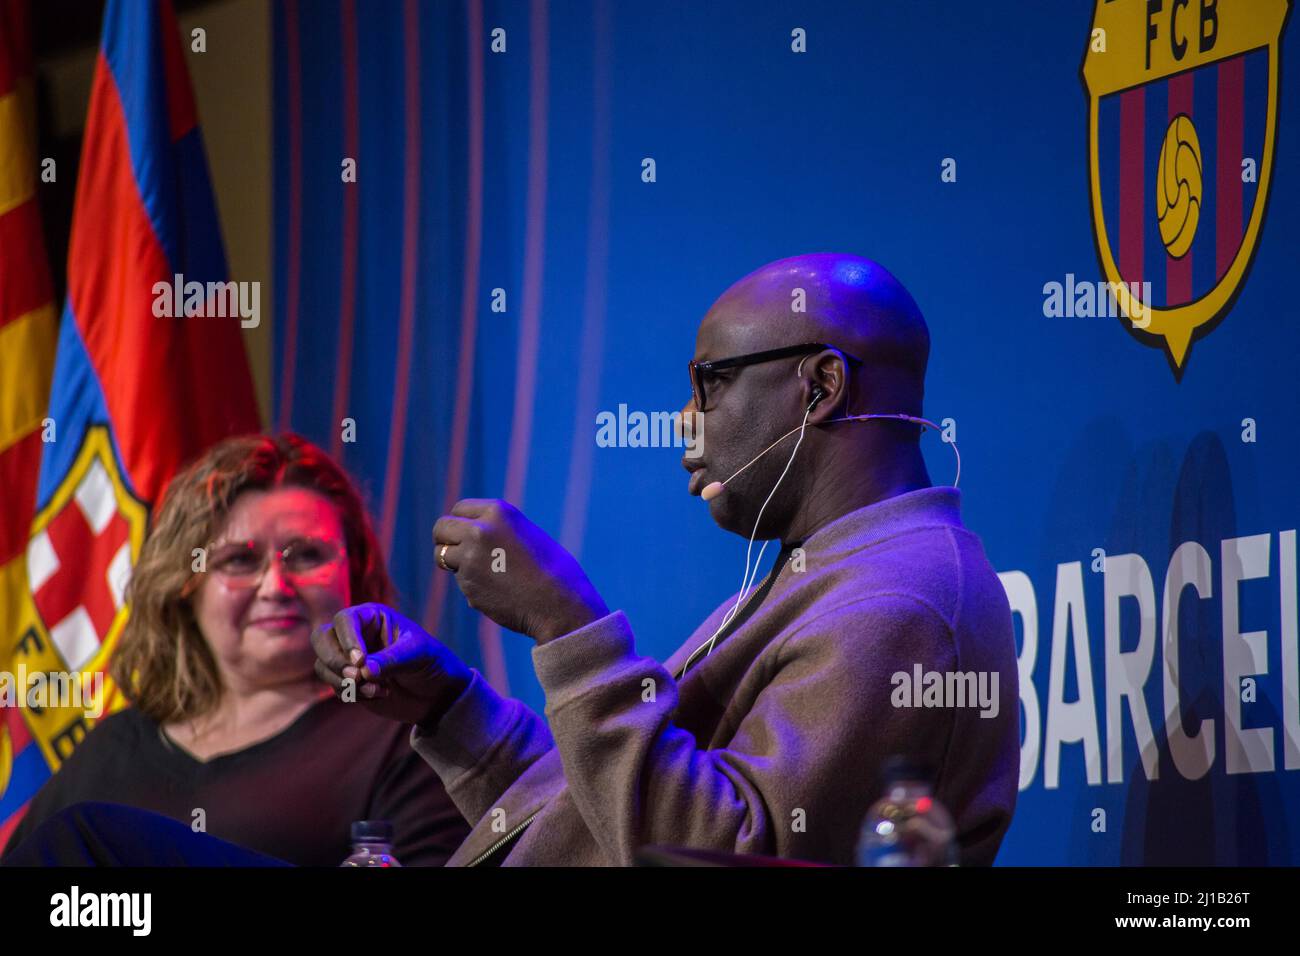 Lilian Thuram (R), former FC Barcelona player and founder of the Lilian Thuram Foundation for Education against Racism is seen speaking Rita Marzoa (L), journalist and moderator of the FC Barcelona event, 'Sport as a tool for social inclusion”. The Public Diplomacy Council of Catalonia, DIPLOCAT and the FC Barcelona Foundation have organized an event on sport as a tool for social inclusion, being opened with a talk with Lilian Thuram, former French FC Barcelona player and creator of the Lilian Thuram Foundation for Education against Racism, who spoke about education and racism in the context o Stock Photo